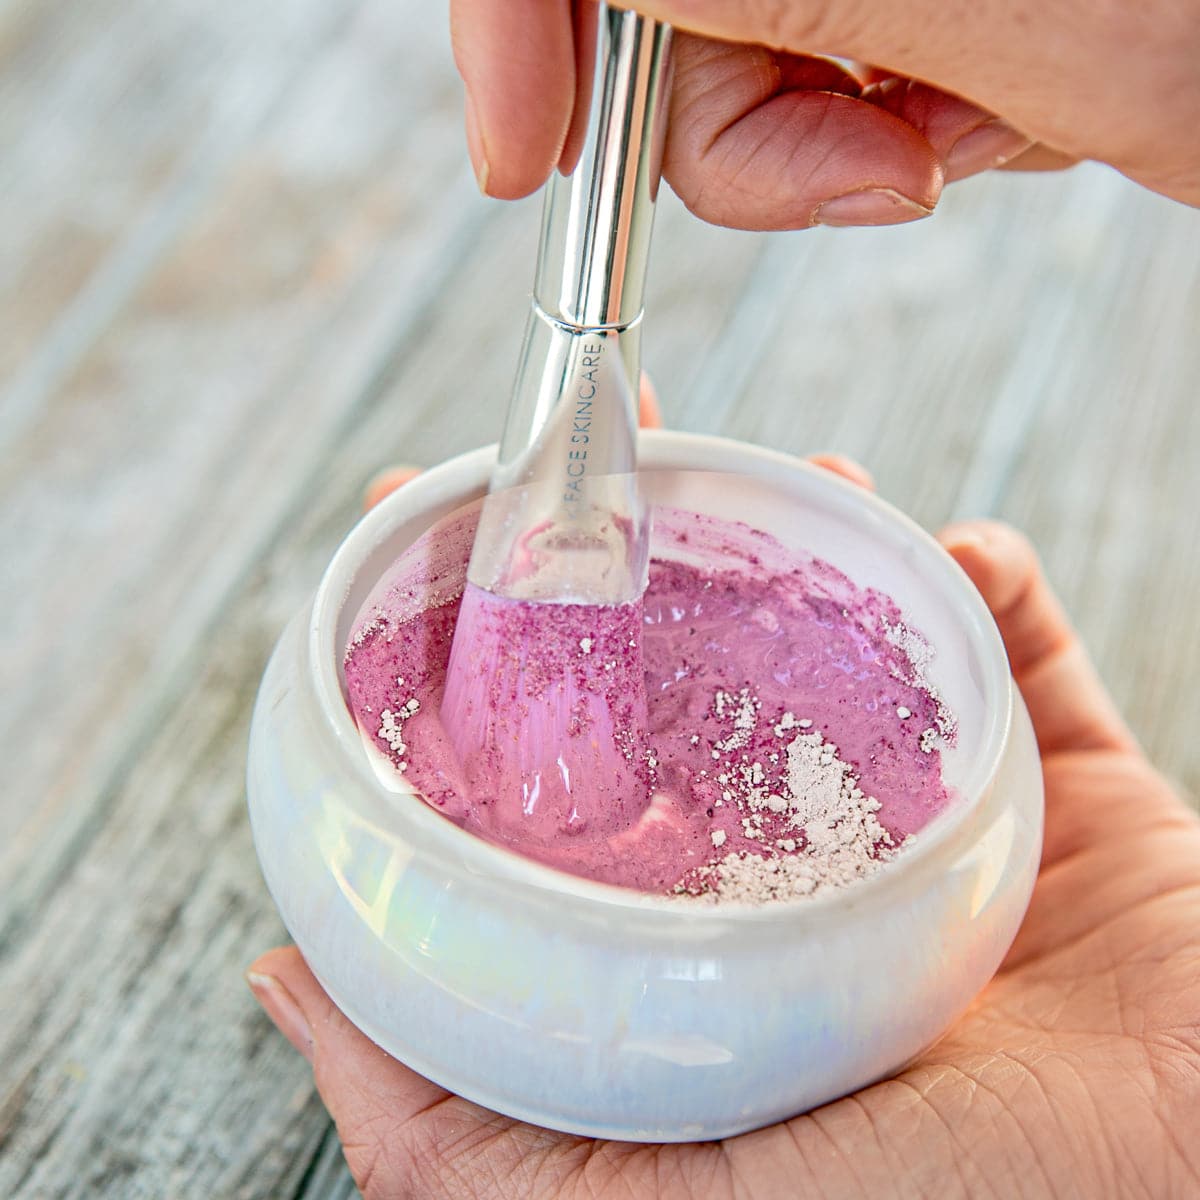 a photo of the IN YOUR FACE BOWL with a powder mask being turned into a pink liquid with our MASK BRUSK inside, stirring the liquid.